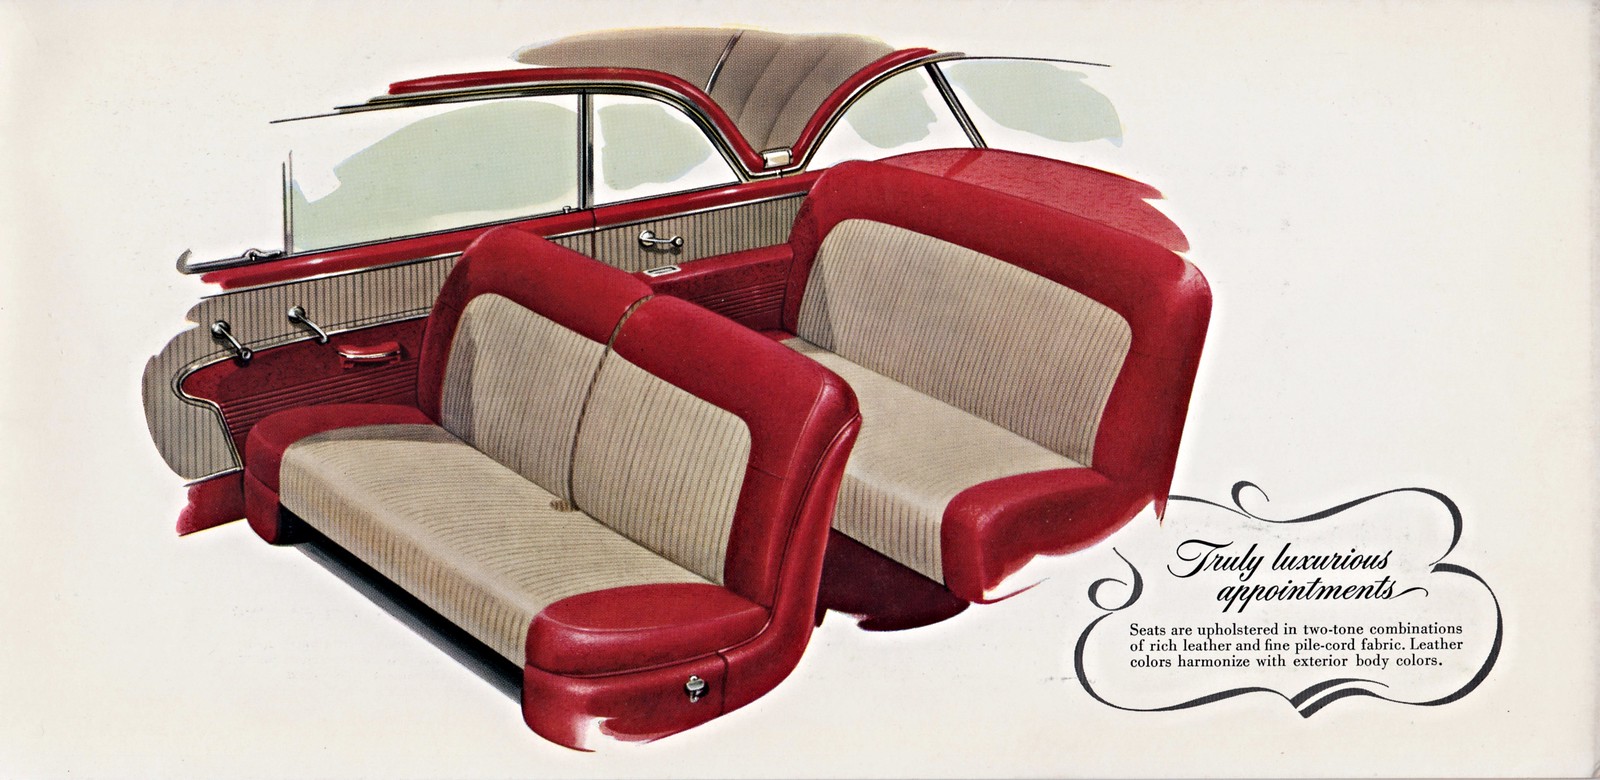 1950 Chevrolet Bel Air Interior | Buick and Oldsmobile (alon… | Flickr